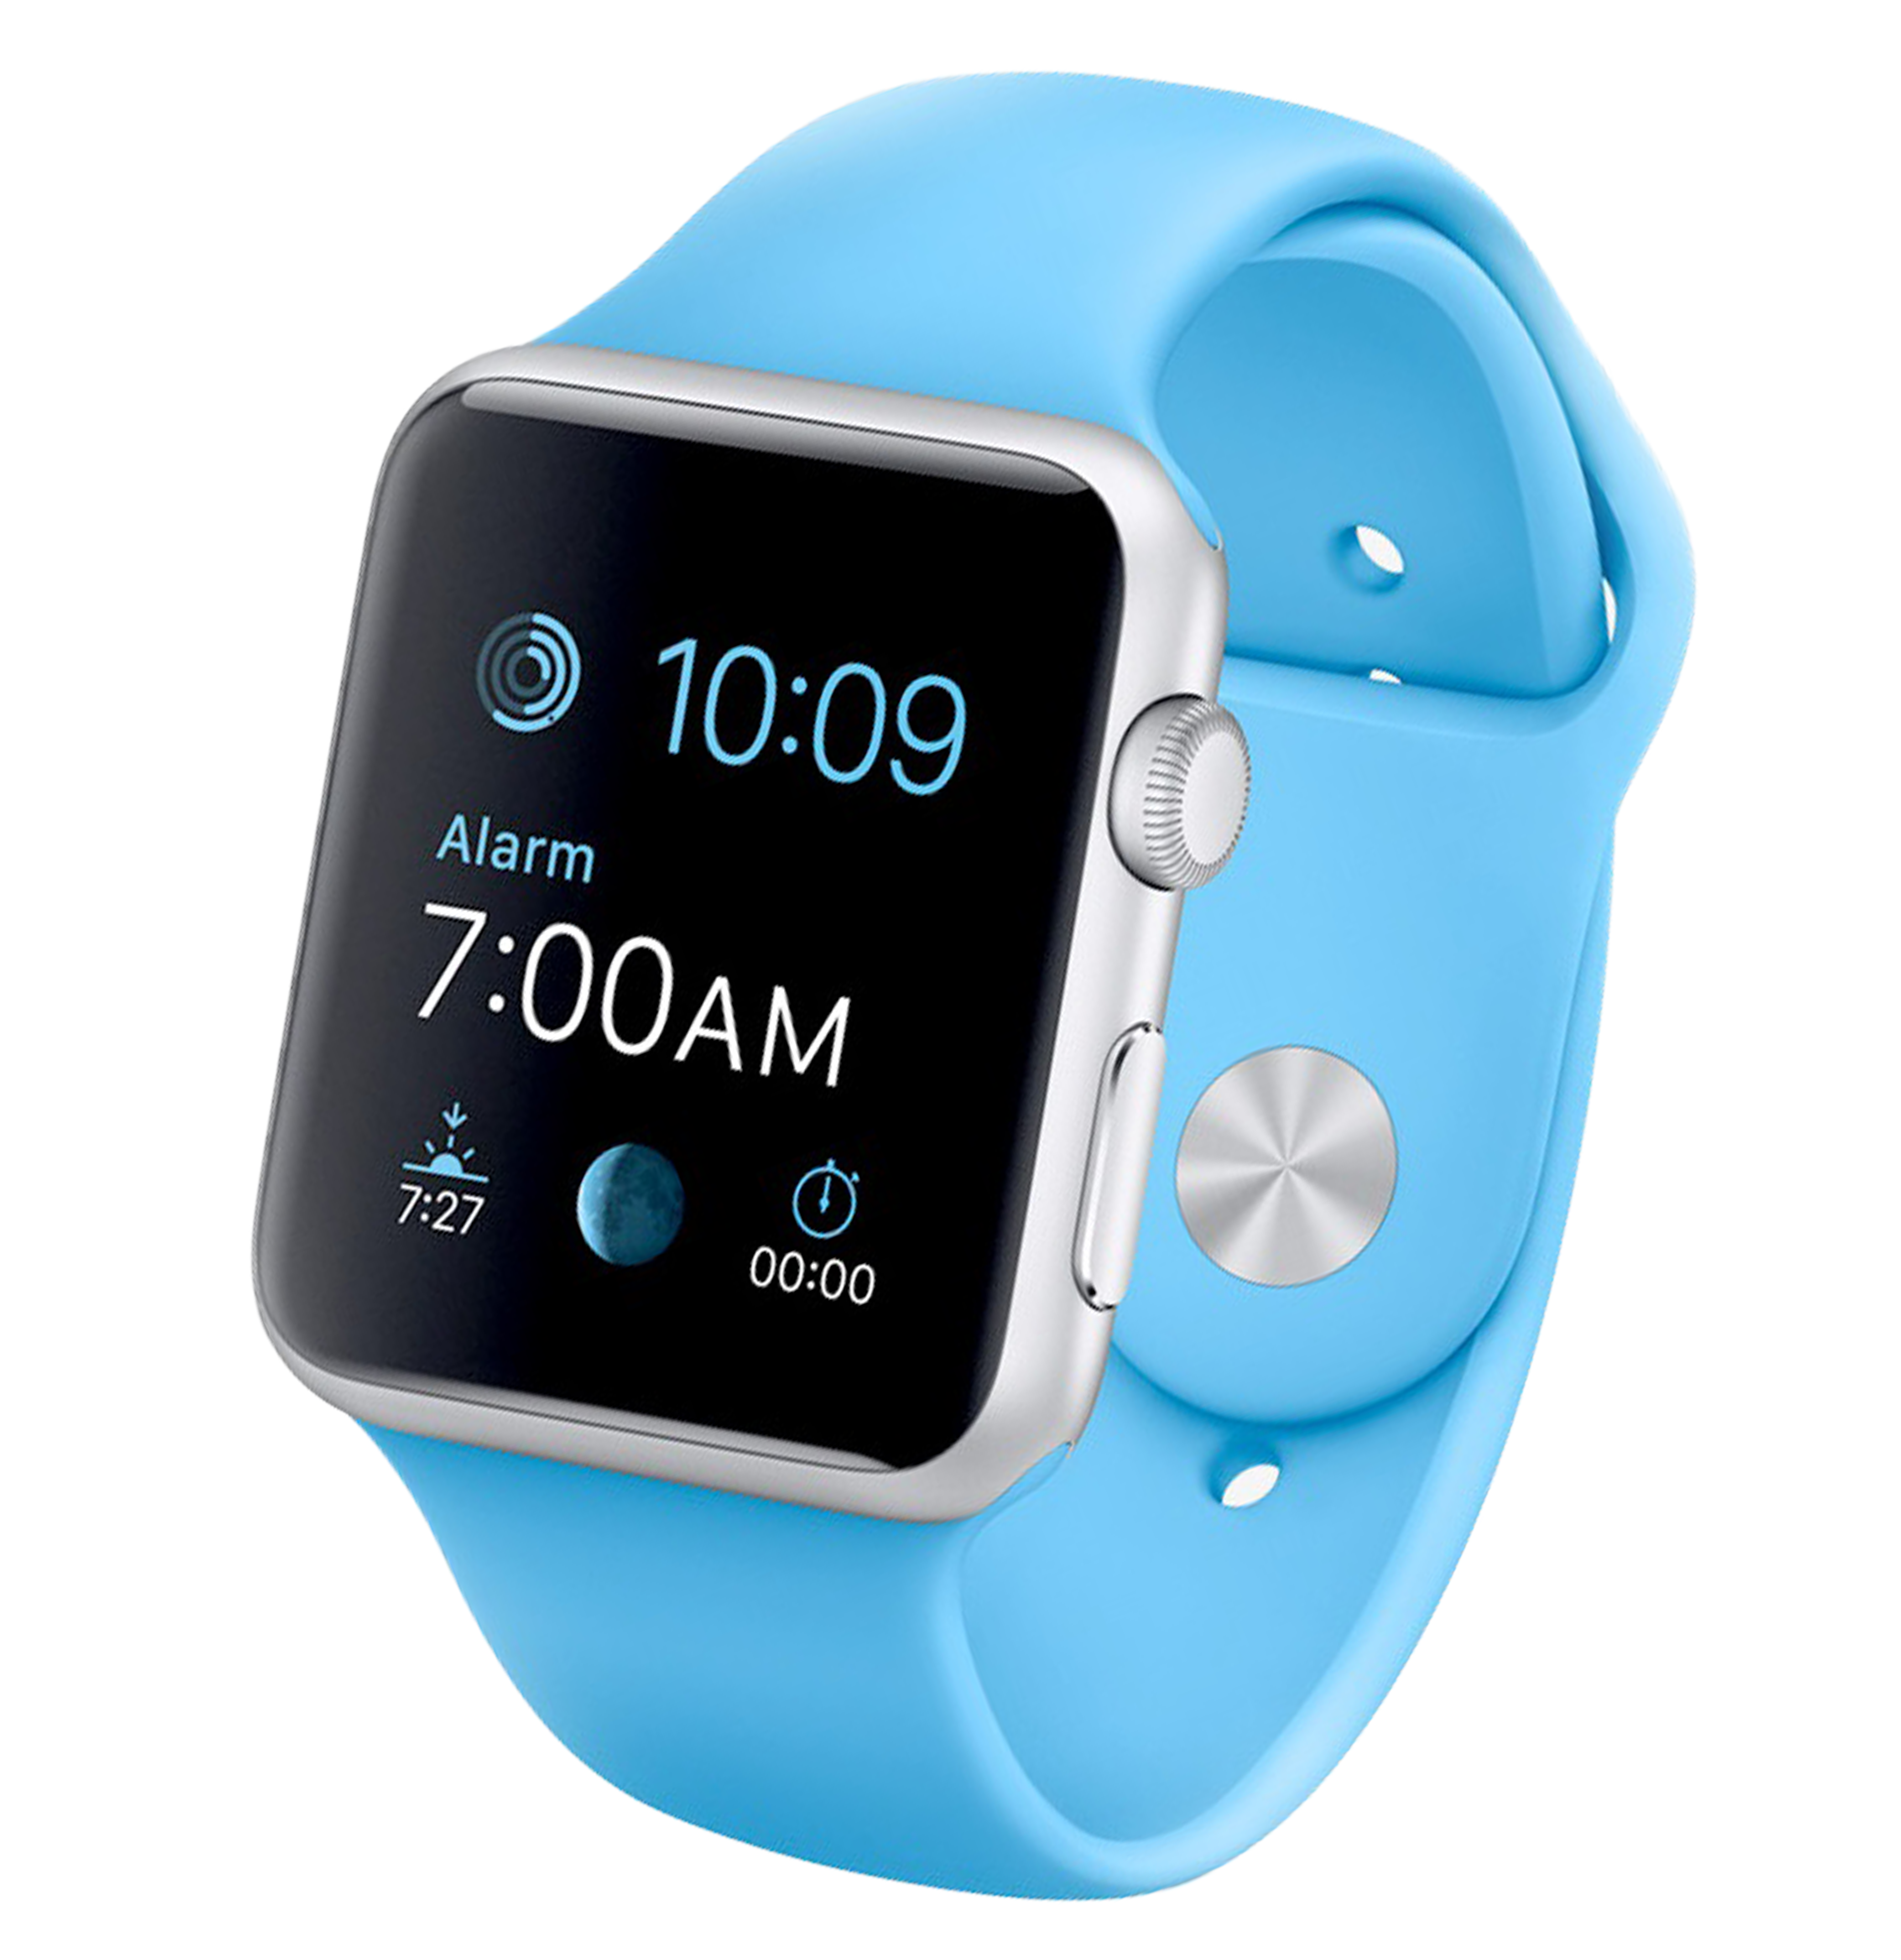 Take the Product IQ Challenge for a chance to win an Apple Watch!